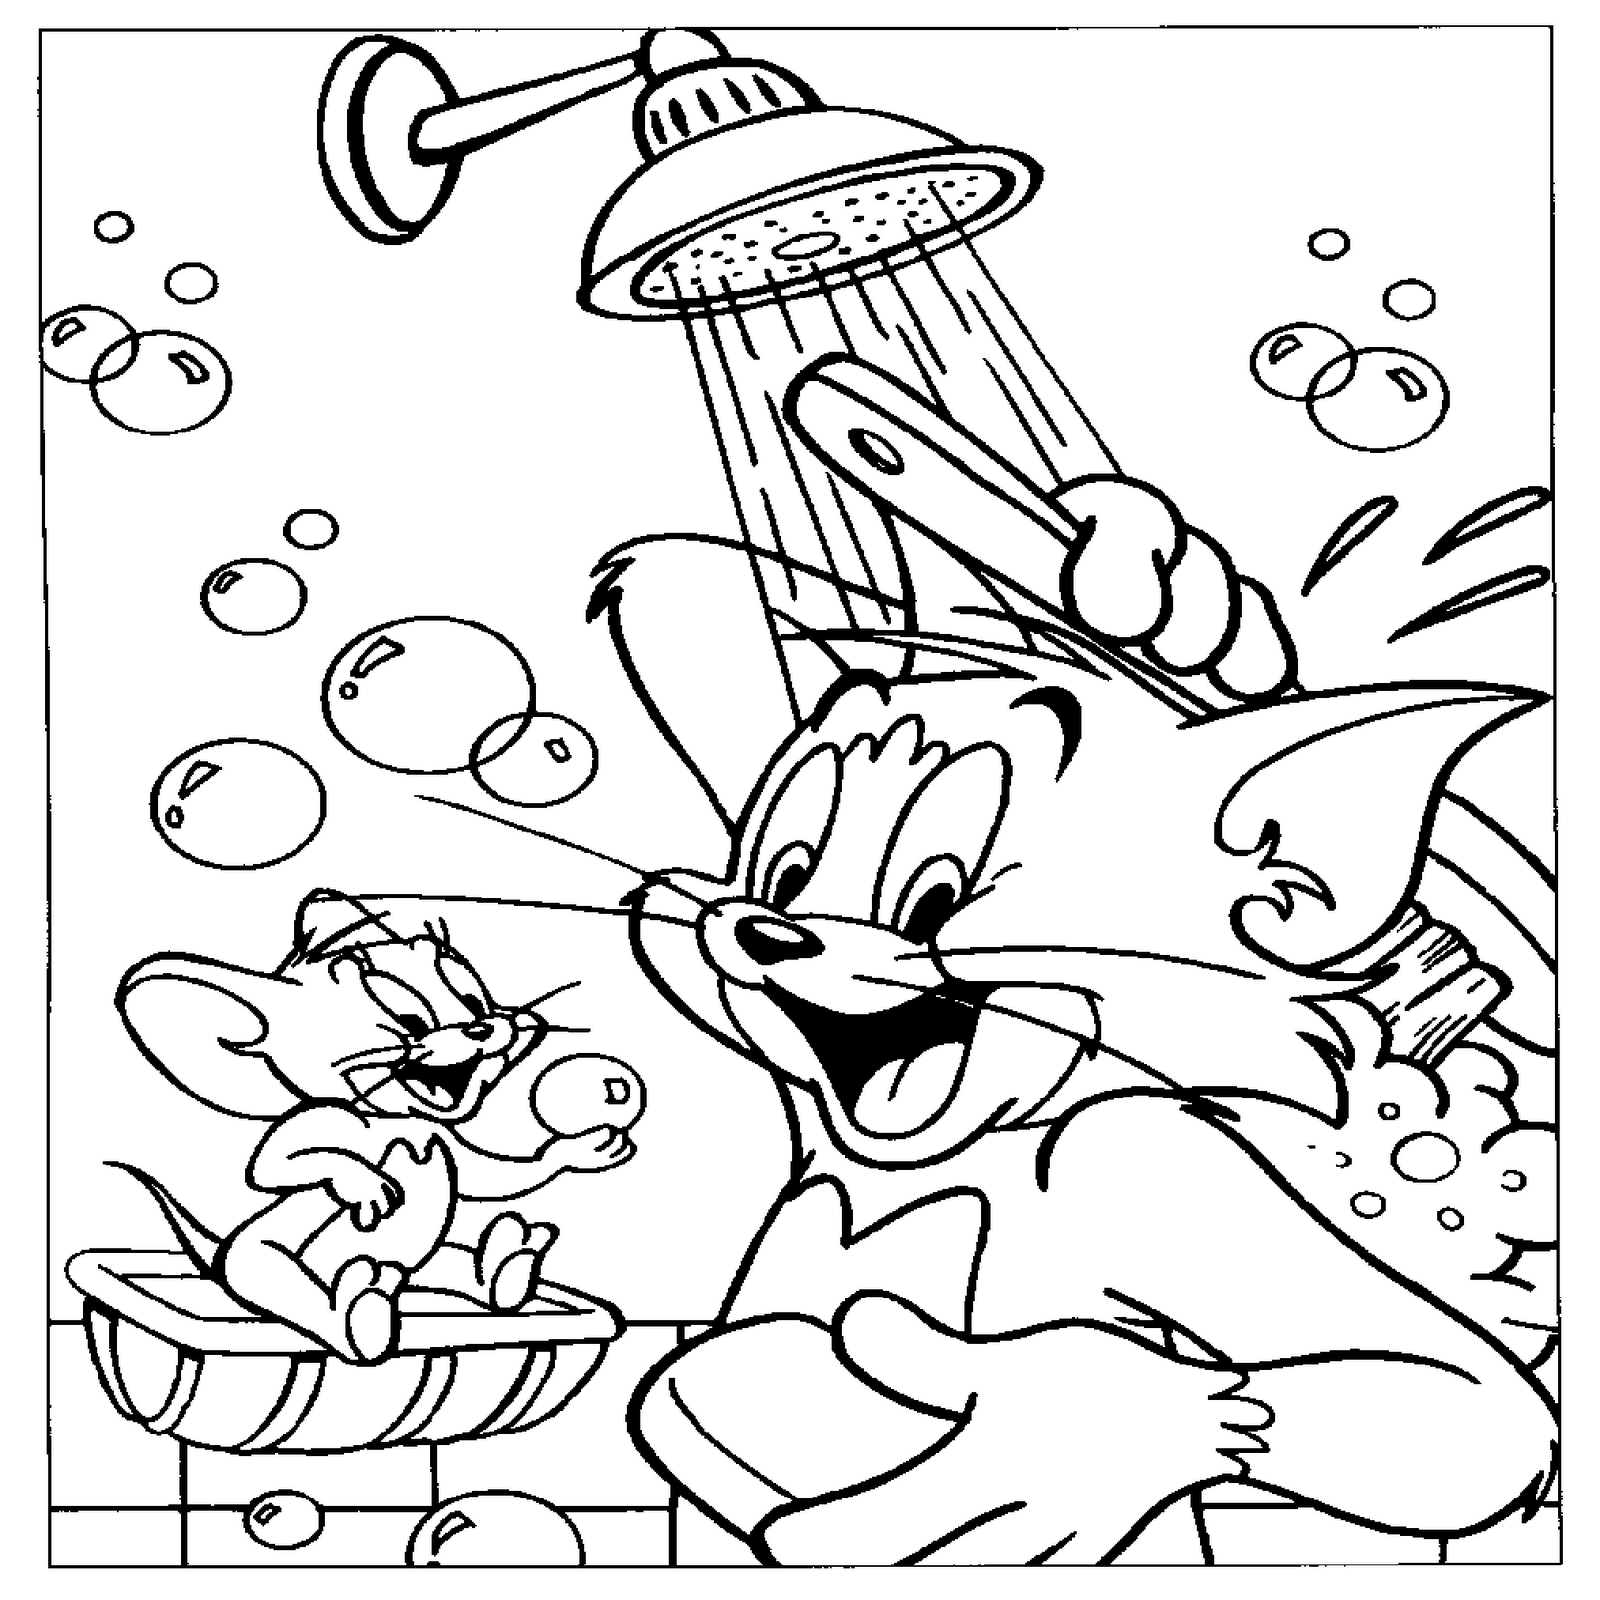 tom and jerry coloring pages online tom and jerry coloring page 2 coloring tom and online pages jerry 